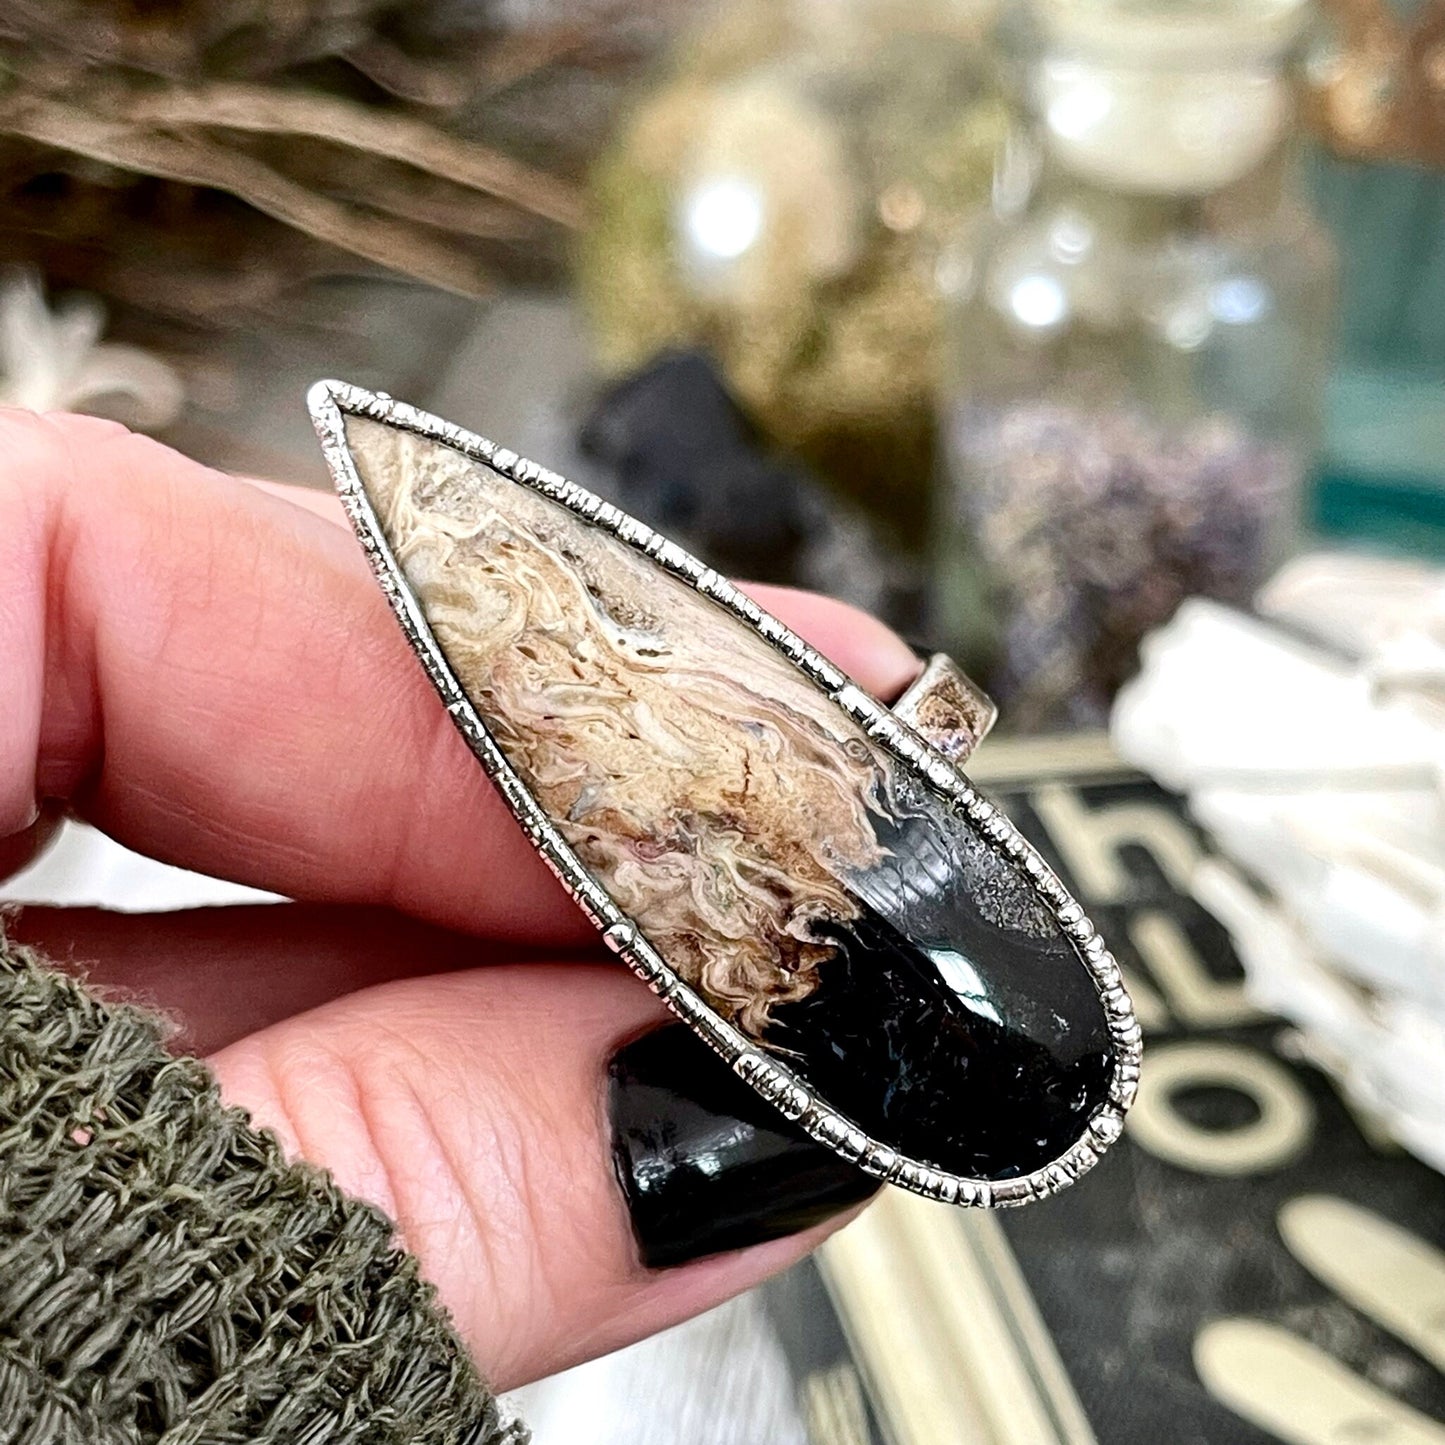 Big Bold Jewelry, Big Crystal Ring, Big Silver Ring, Big Stone Ring, Etsy ID: 1400312890, Fossilized Palm Root, FOXLARK- RINGS, Jewelry, Large Boho Ring, Large Crystal Ring, Large Stone Ring, Natural stone ring, Rings, silver crystal ring, Silver Stone Je